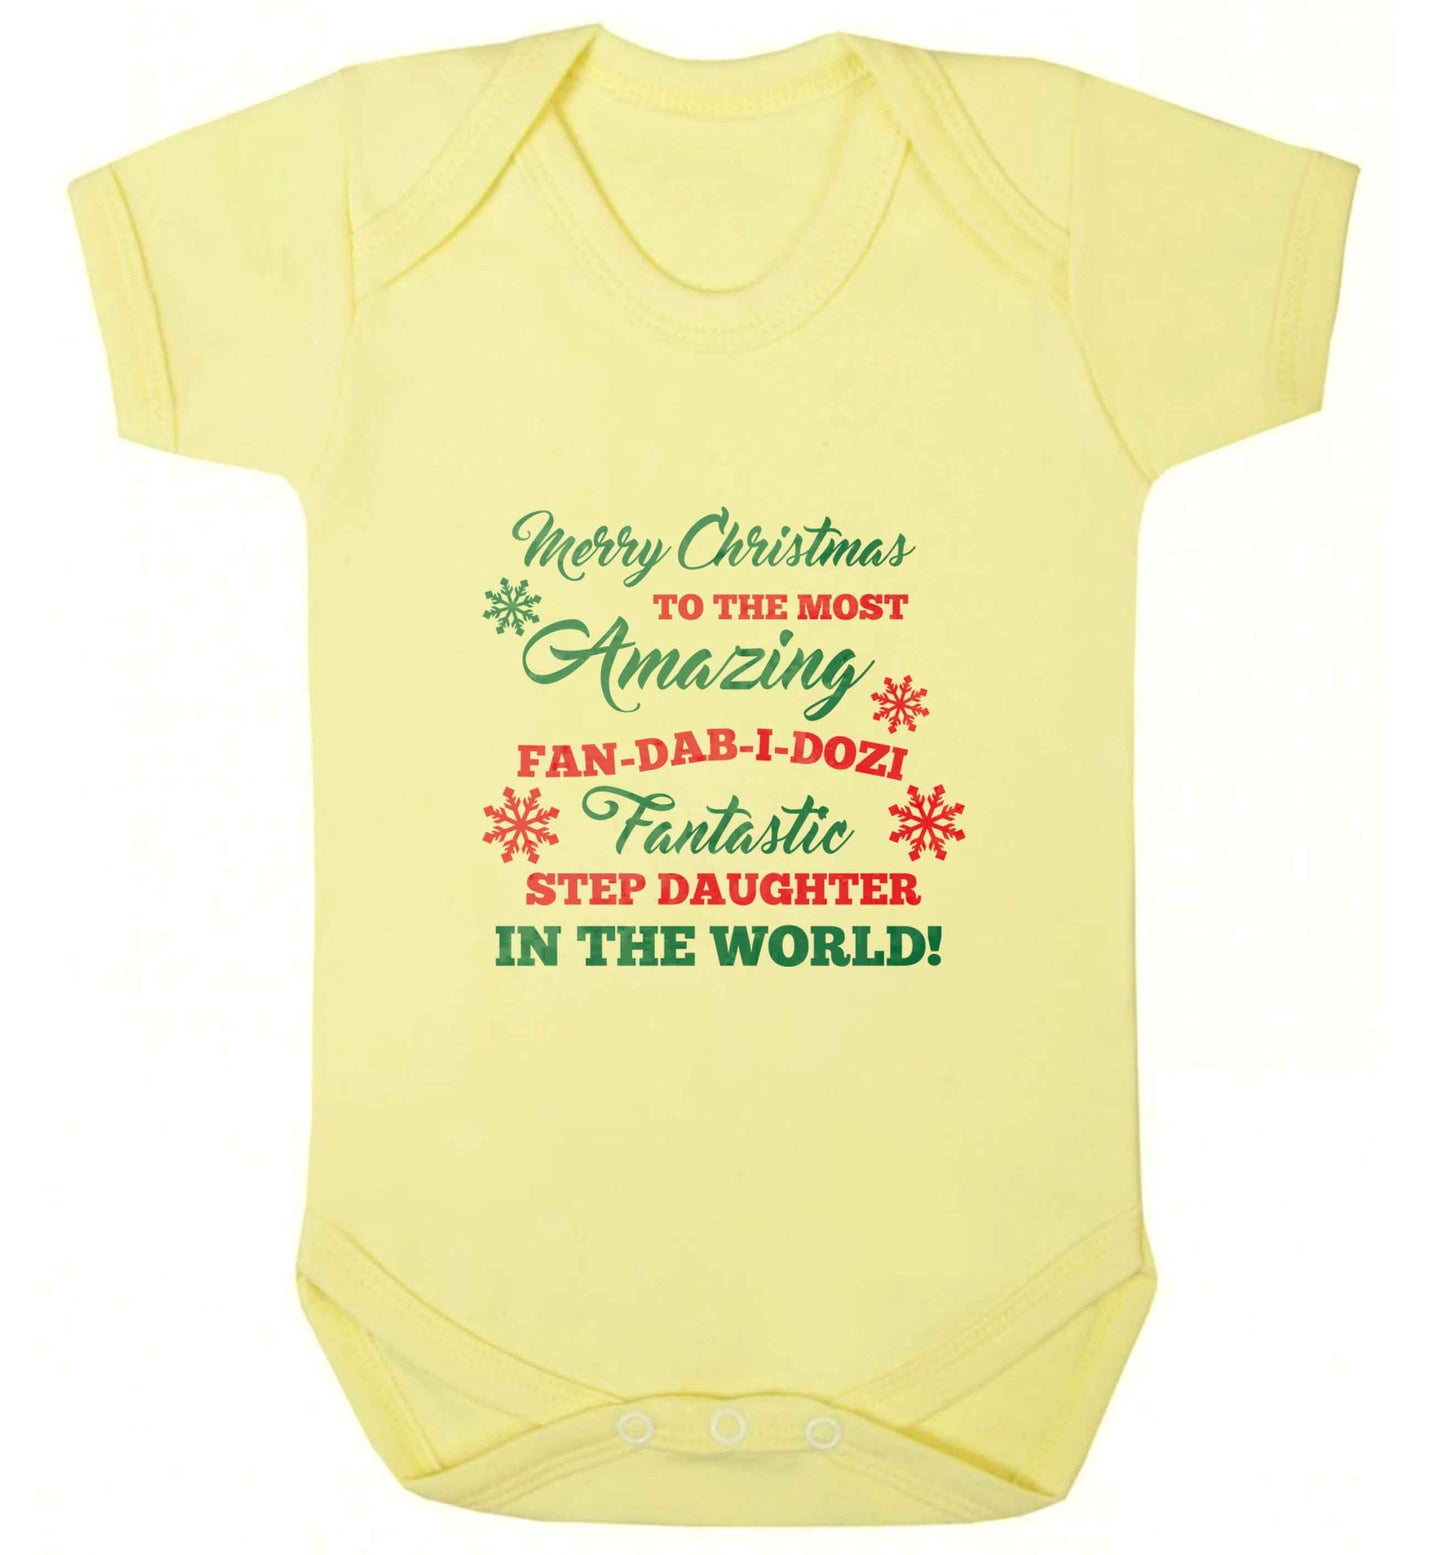 Merry Christmas to the most amazing fan-dab-i-dozi fantasic Step Daughter in the world baby vest pale yellow 18-24 months